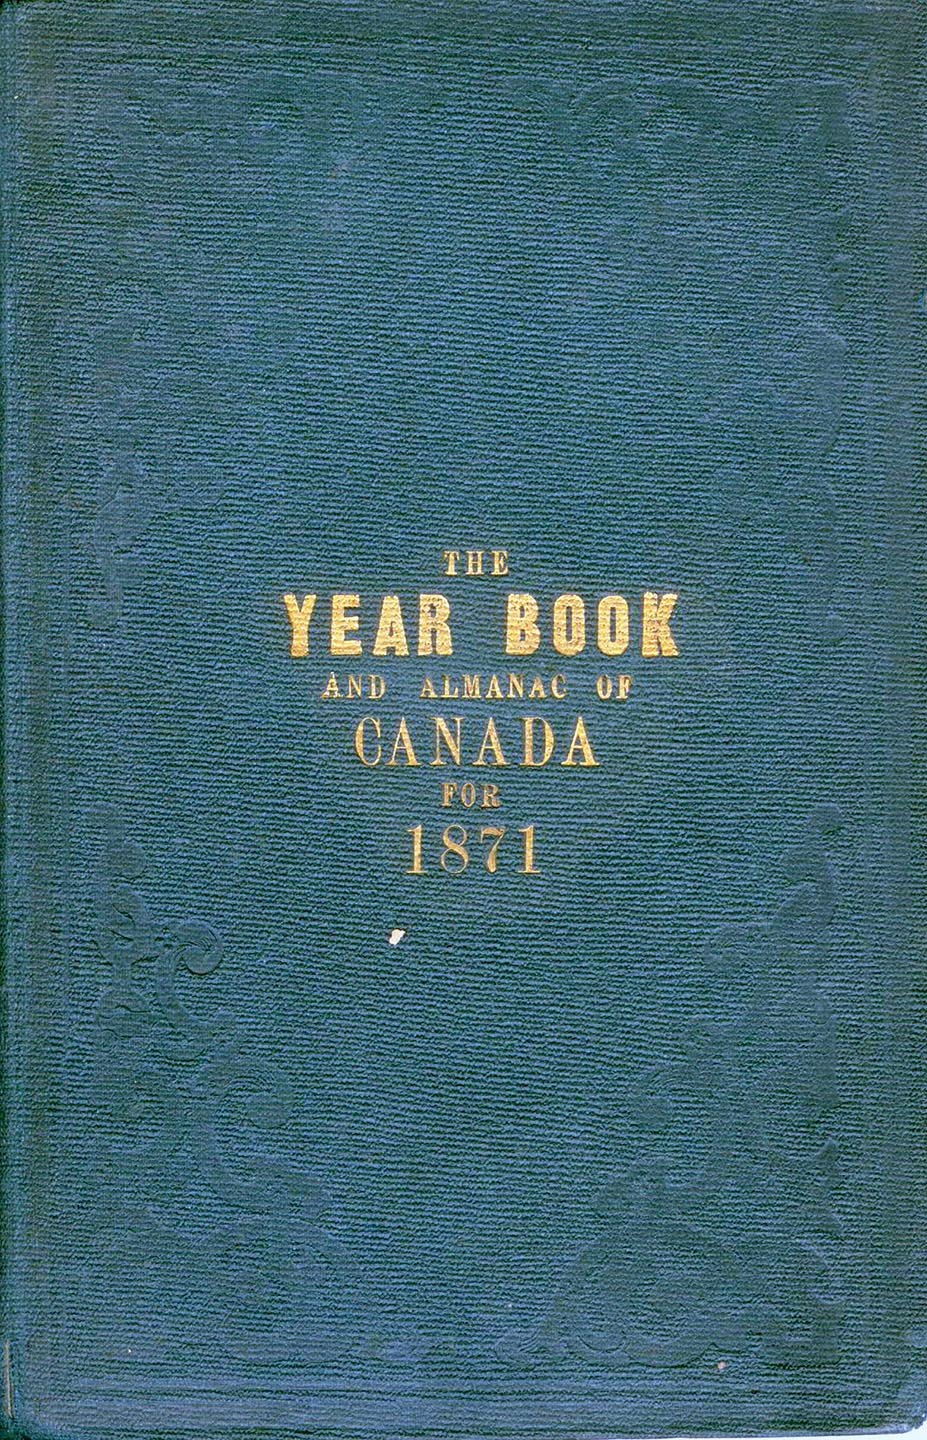 The Year Book and Almanac of Canada for 1871